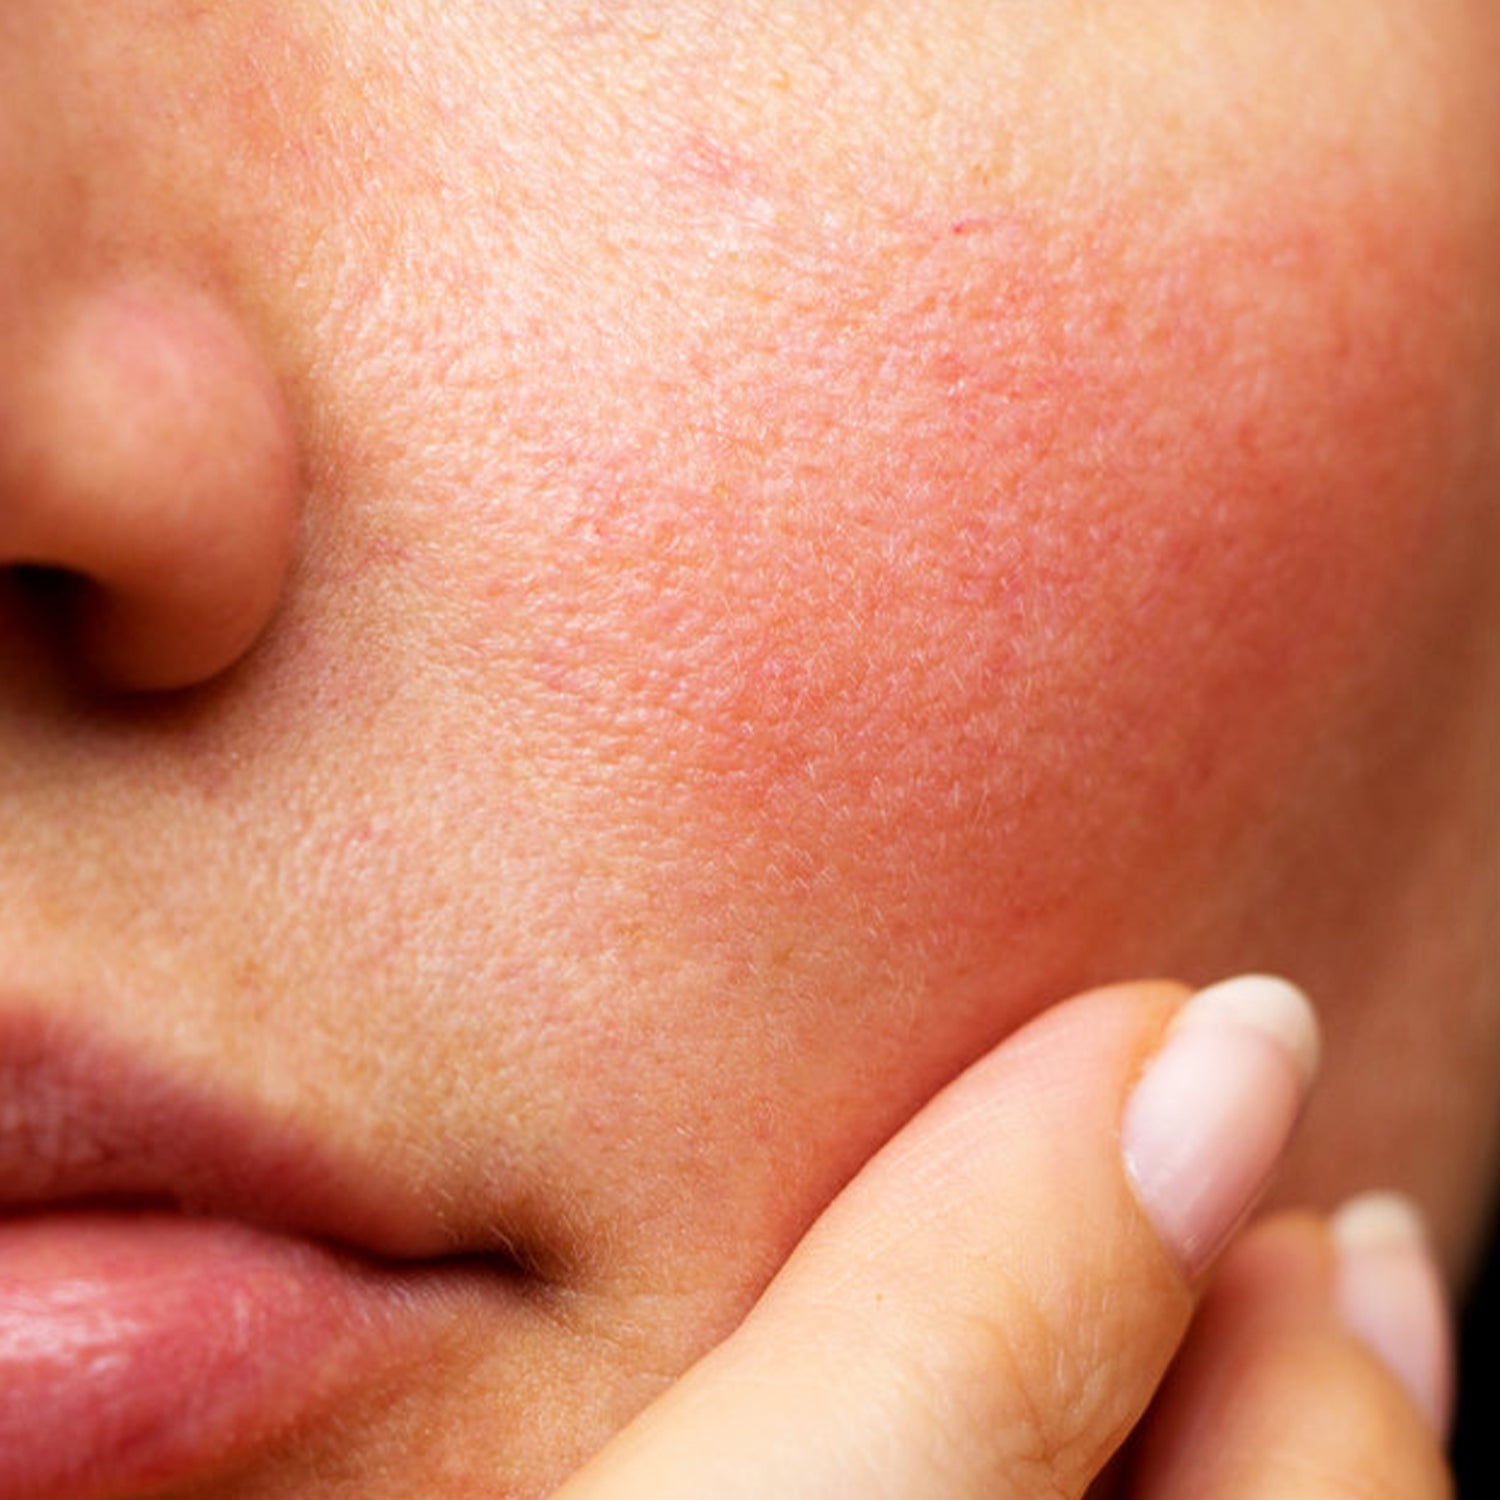 How Do I Know If I Have Sensitive or Sensitized Skin?